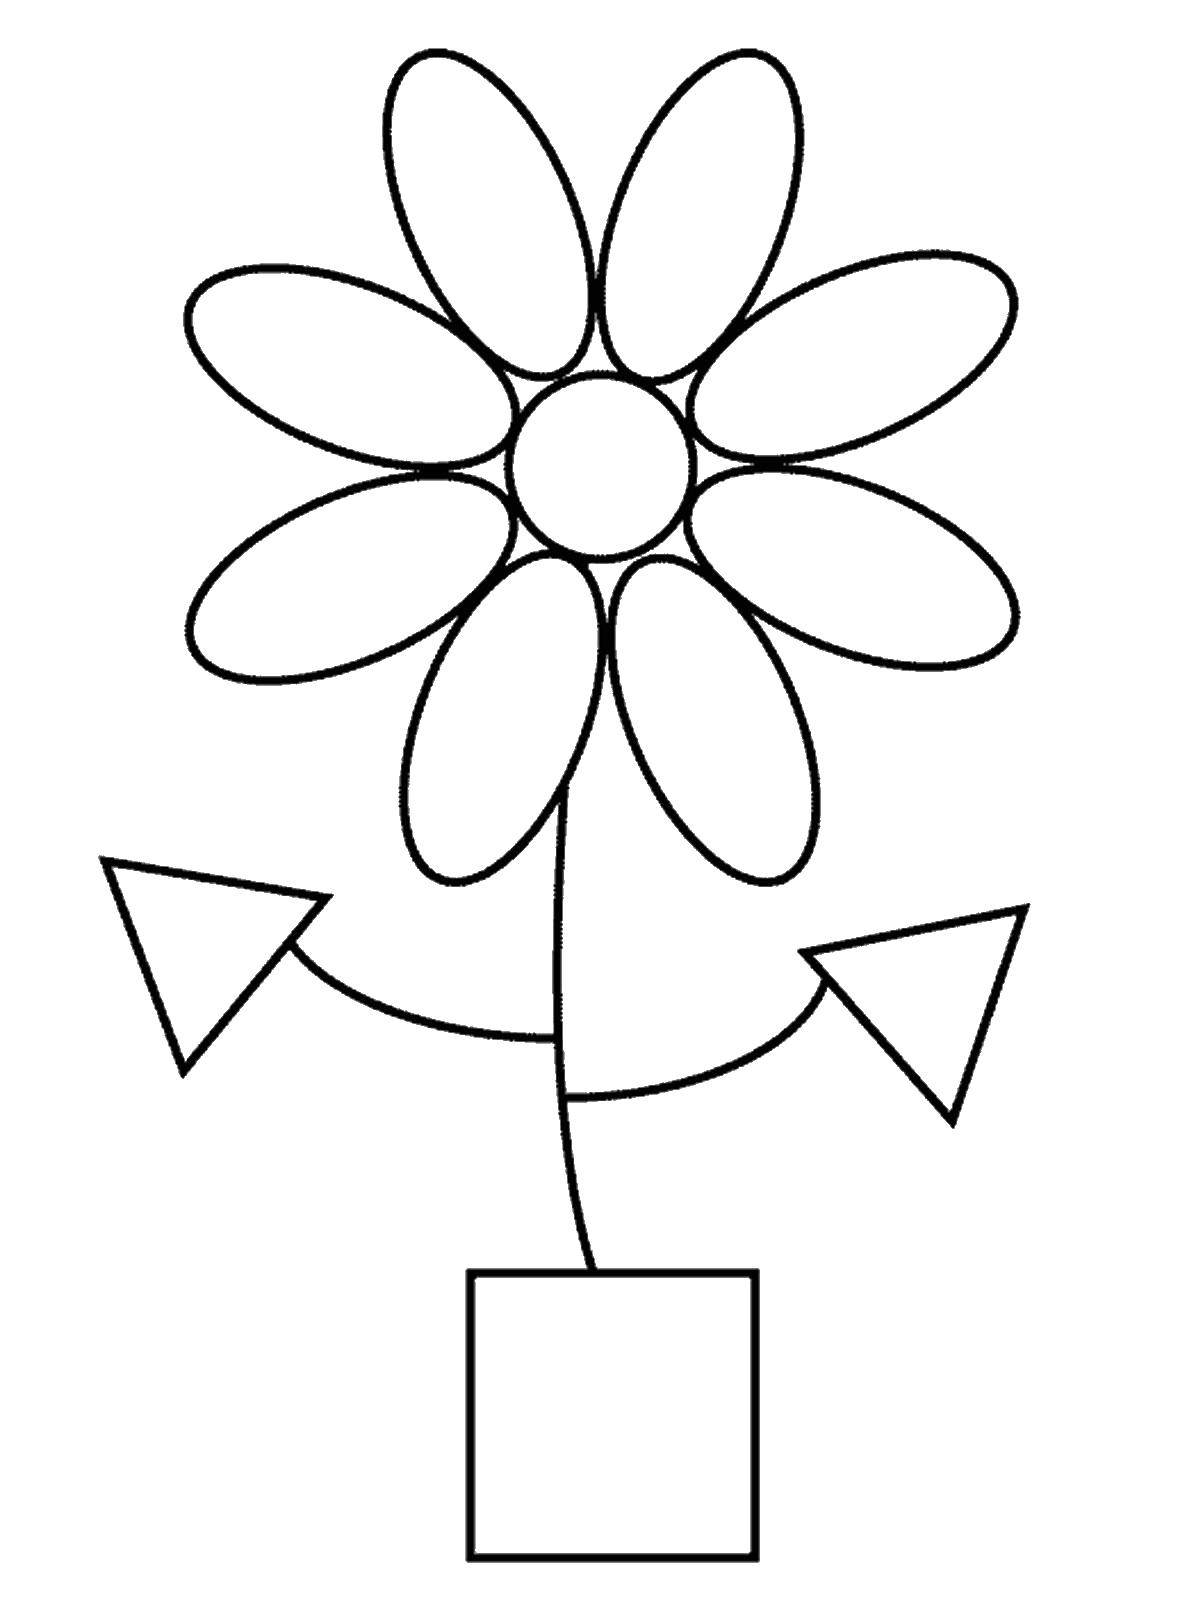 Coloring Daisy figure. Category coloring of the figures. Tags:  chamomile, shapes.